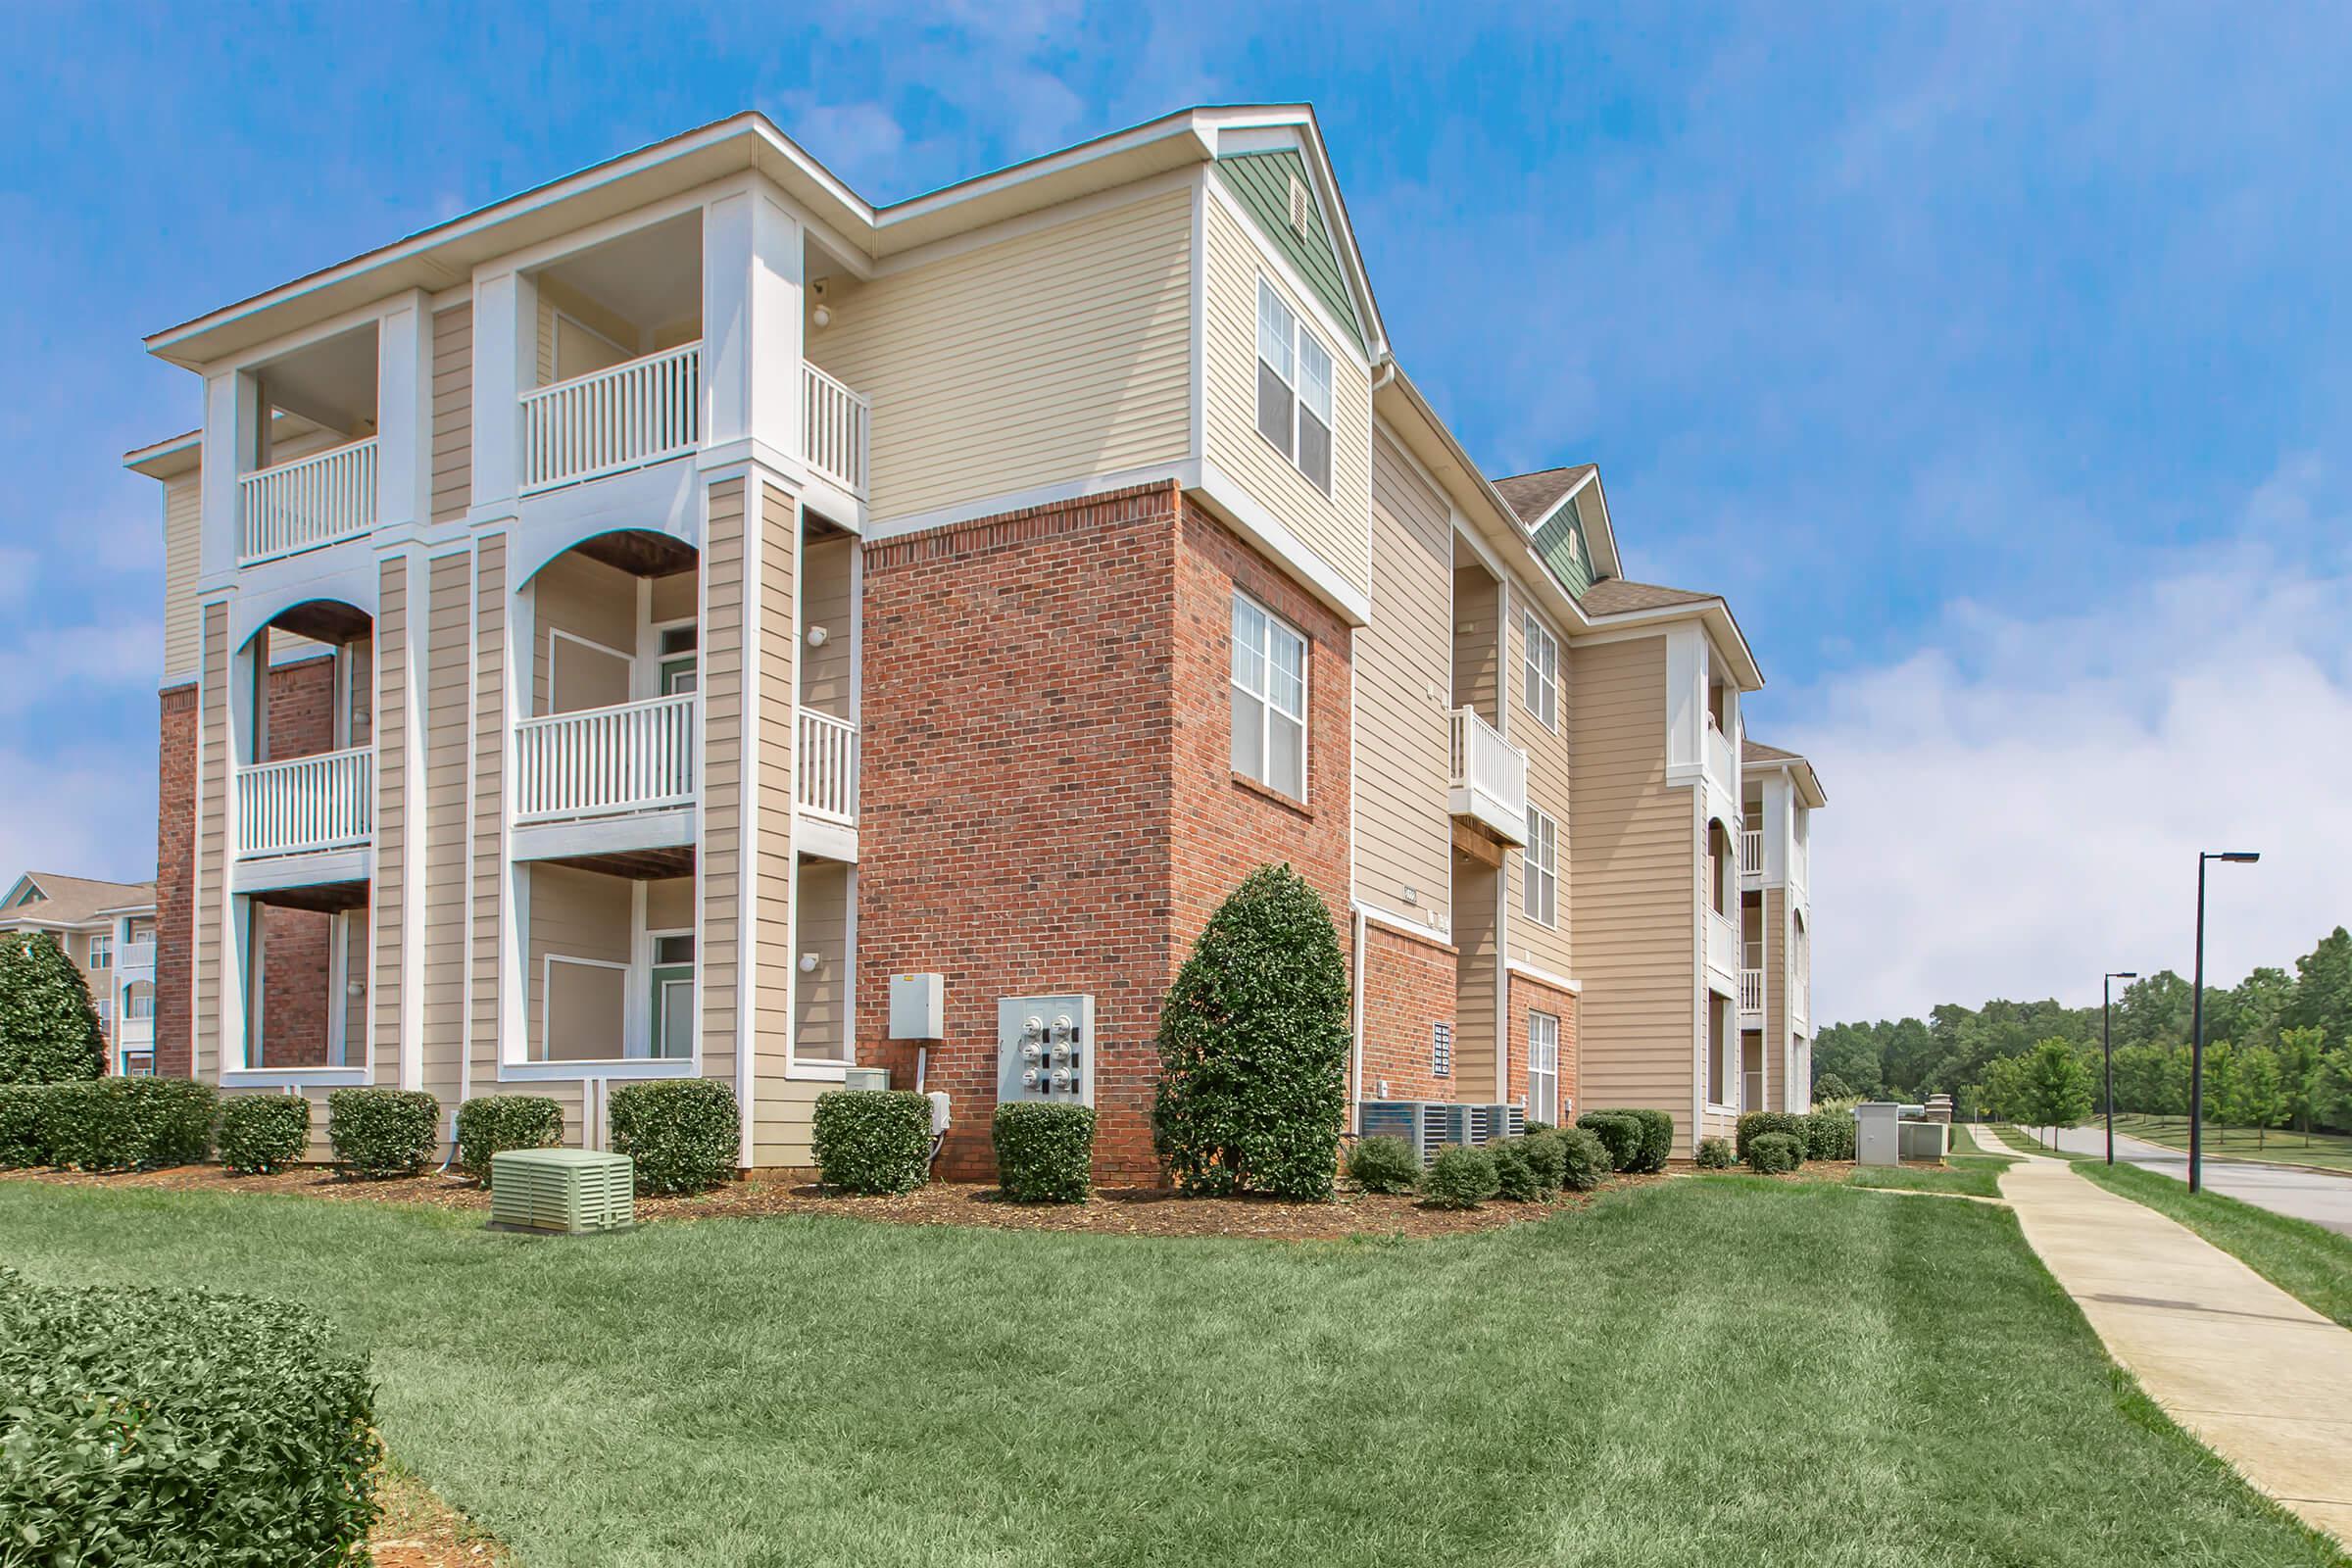 Enjoy Our Beautifully Manicured Grounds At Heather Ridge In Charolette, North Carolina